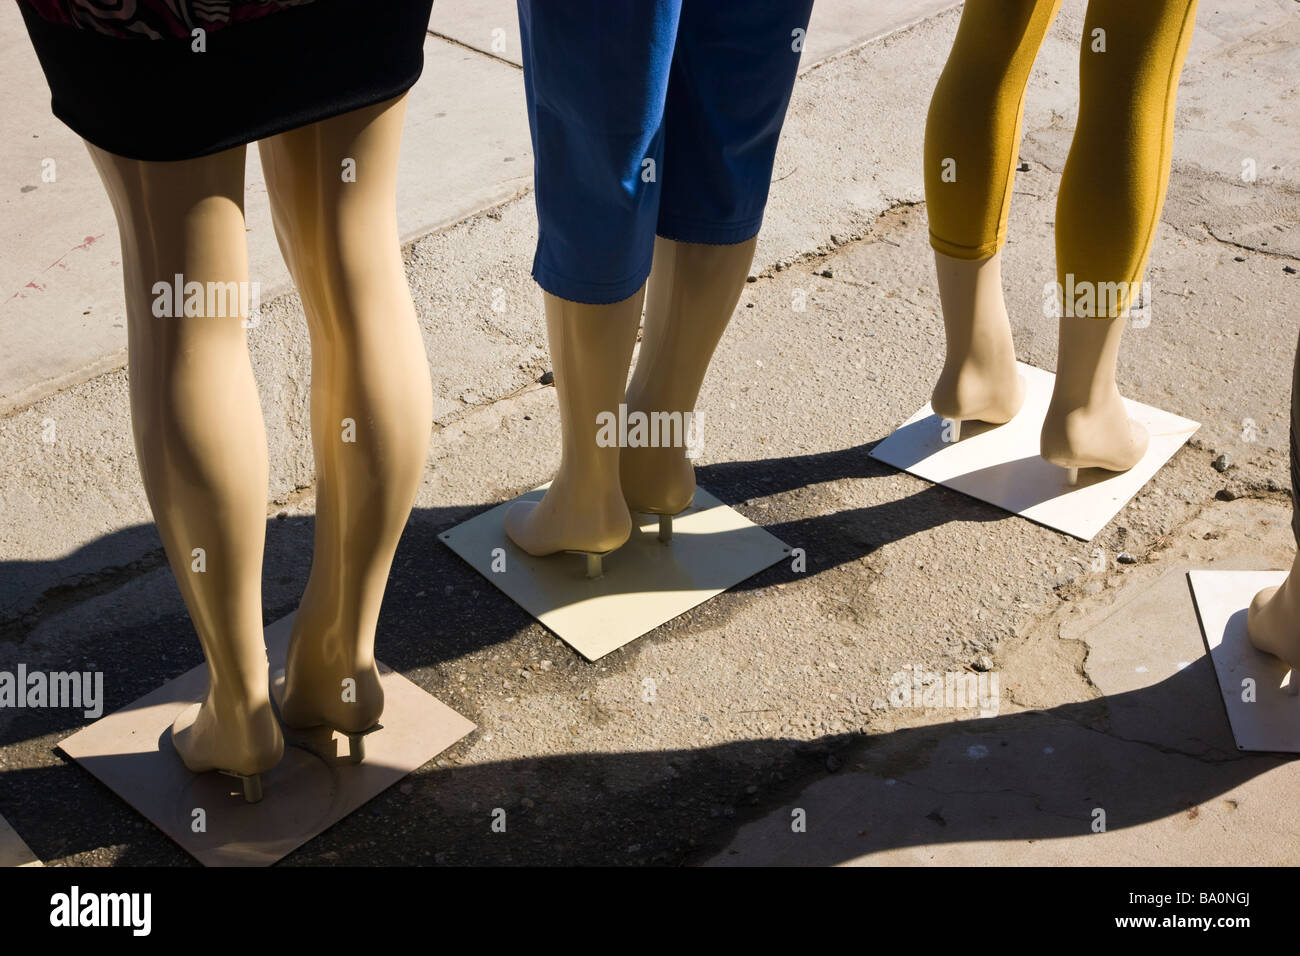 Legs of female mannequins wearing pants. Stock Photo